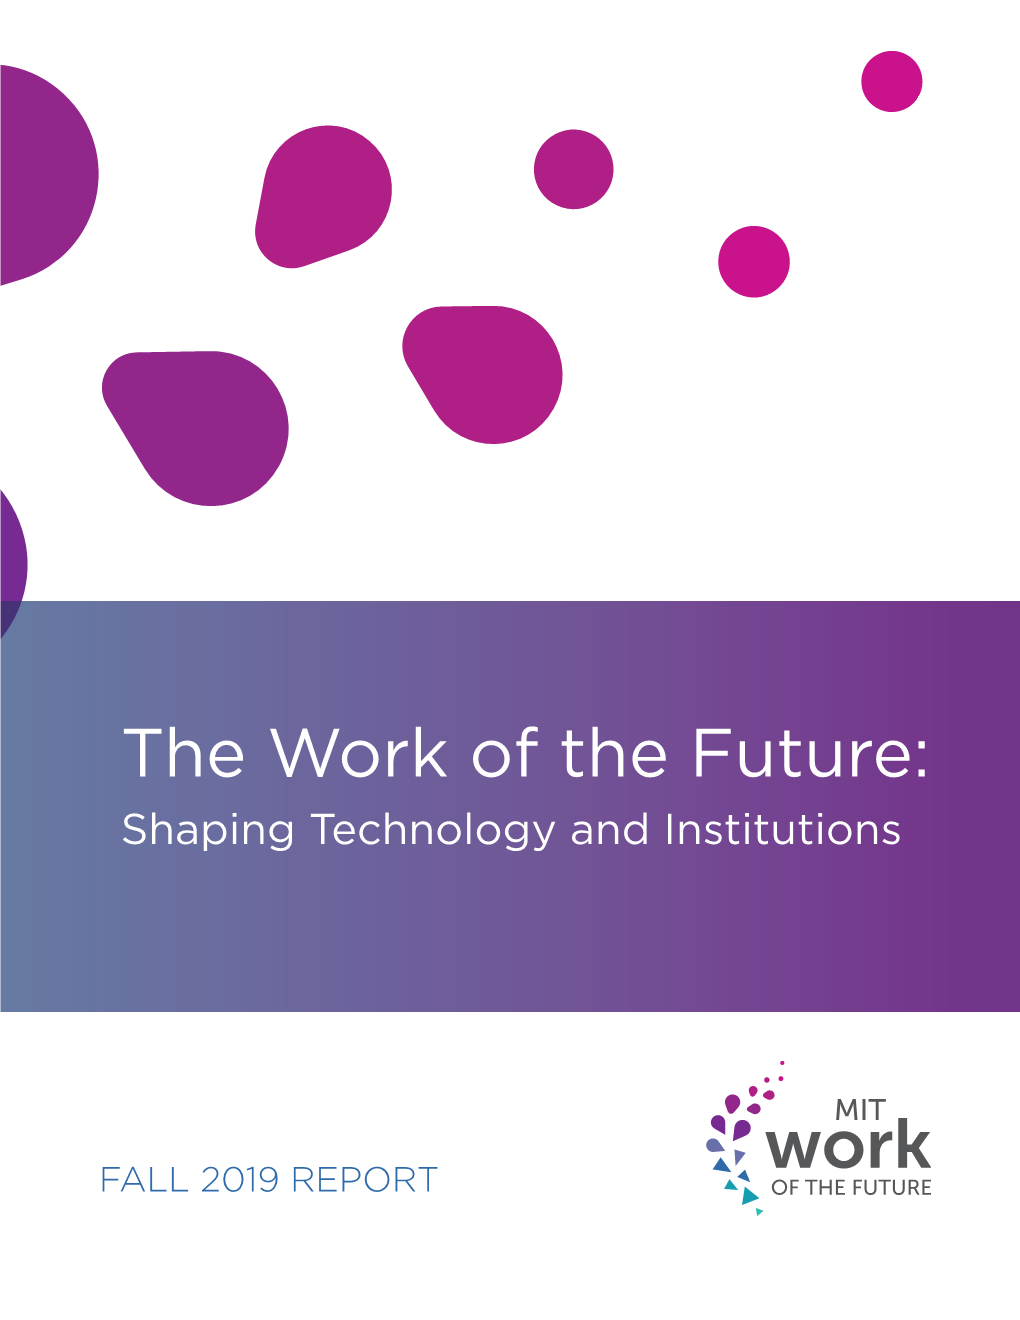 The Work of the Future: Shaping Technology and Institutions